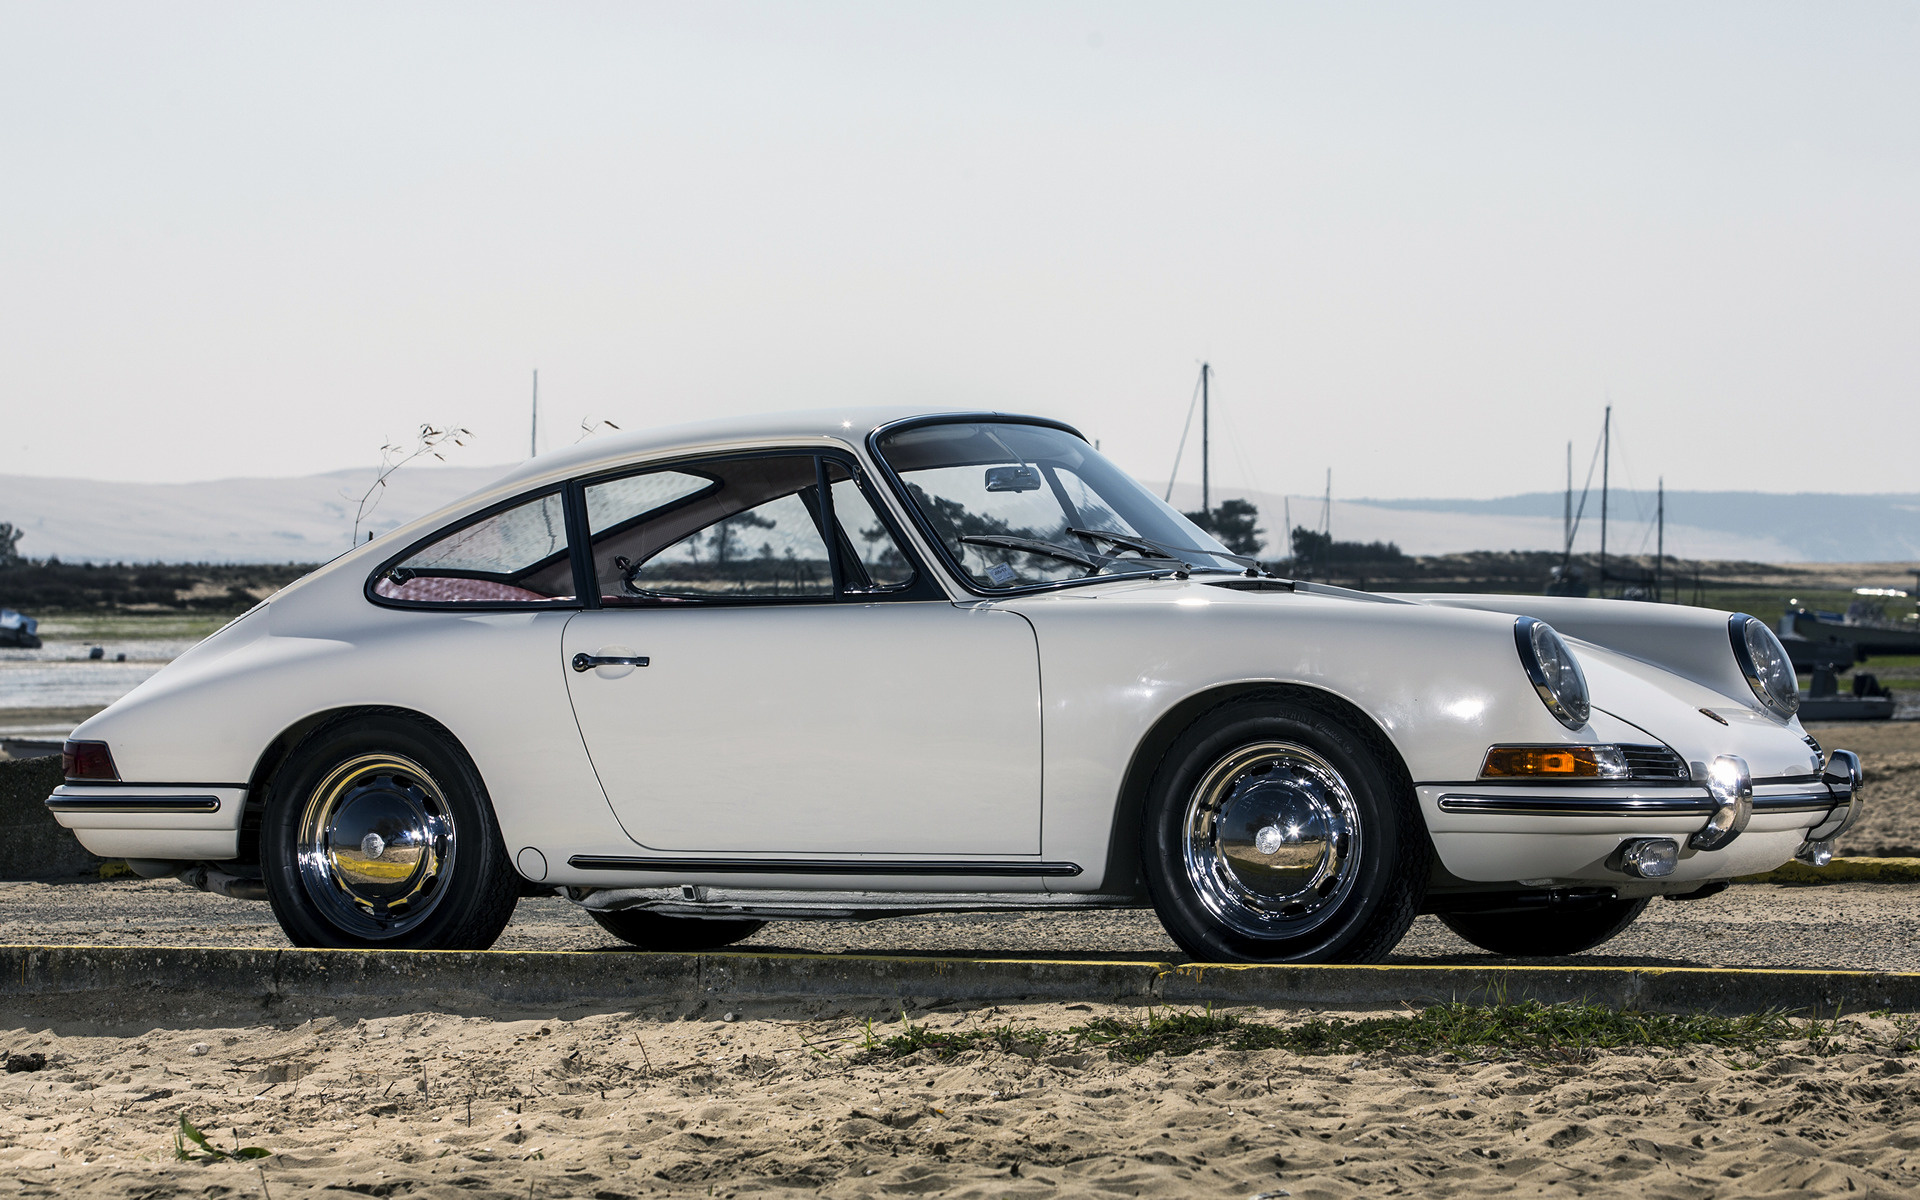 1964 Porsche 911 - Wallpapers and HD Images | Car Pixel